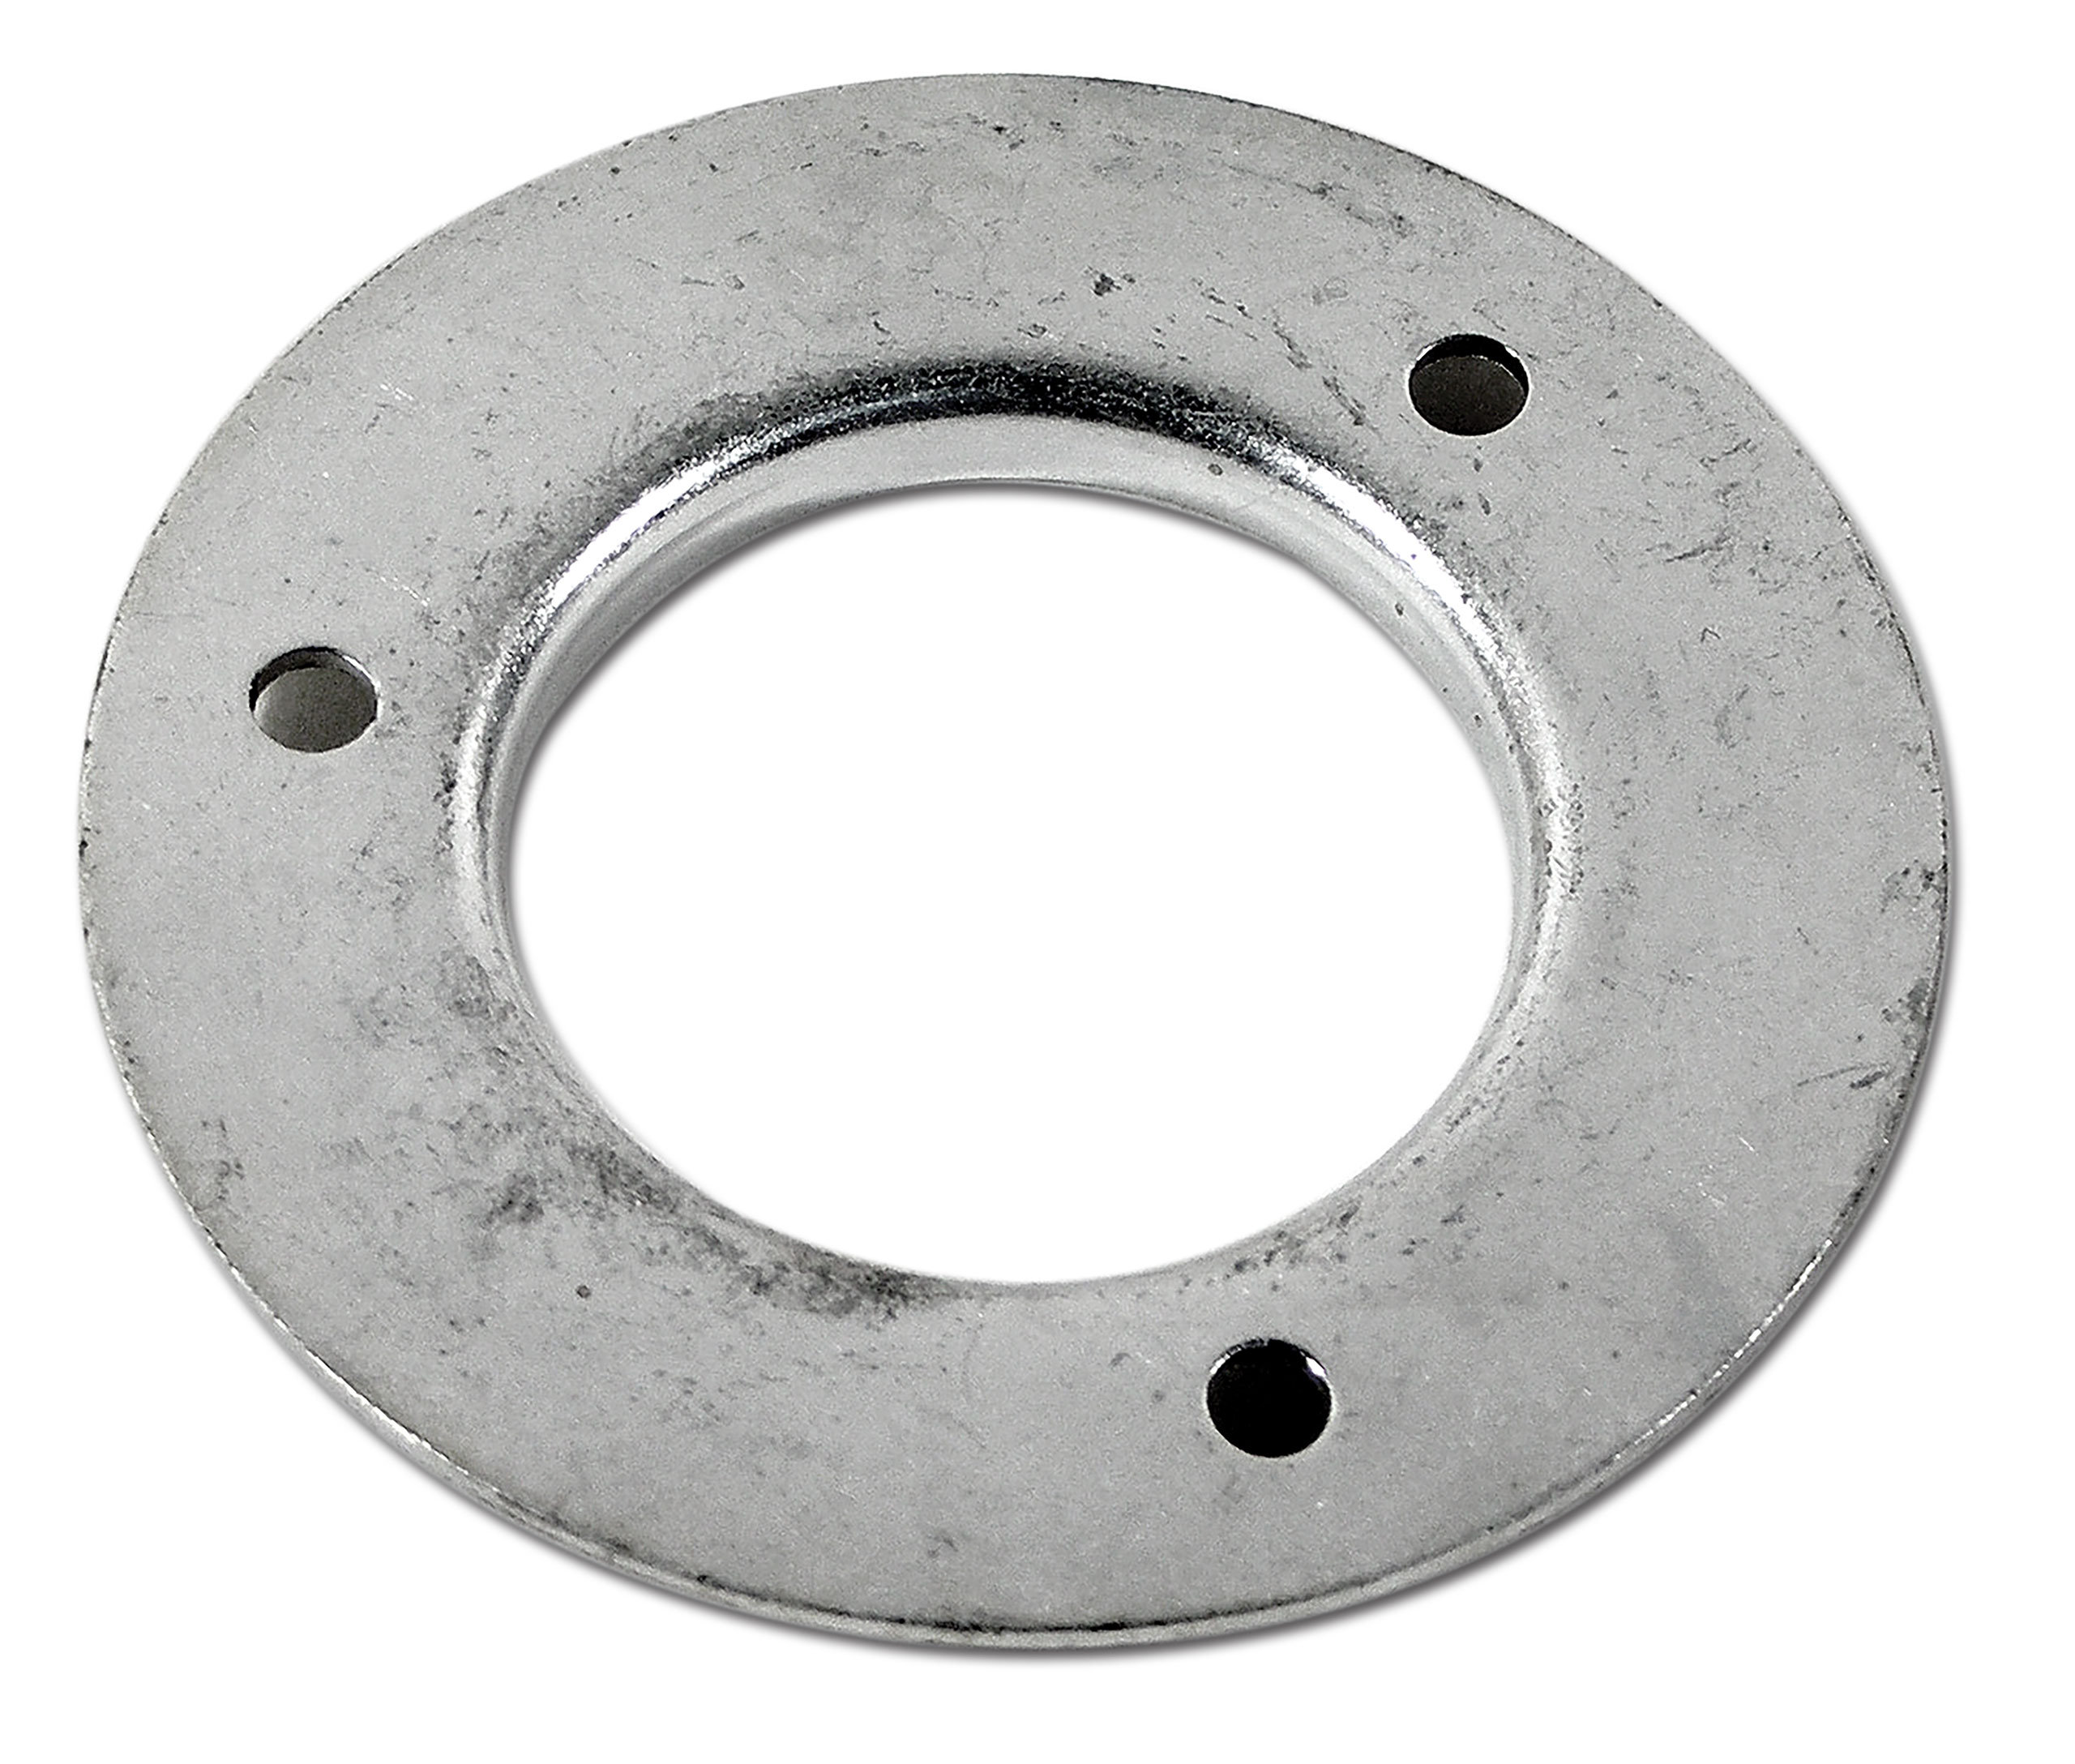 C2 1963 Chevrolet Corvette Hubcap Spinner Reinforcement. 4 Required - Auto Accessories of America